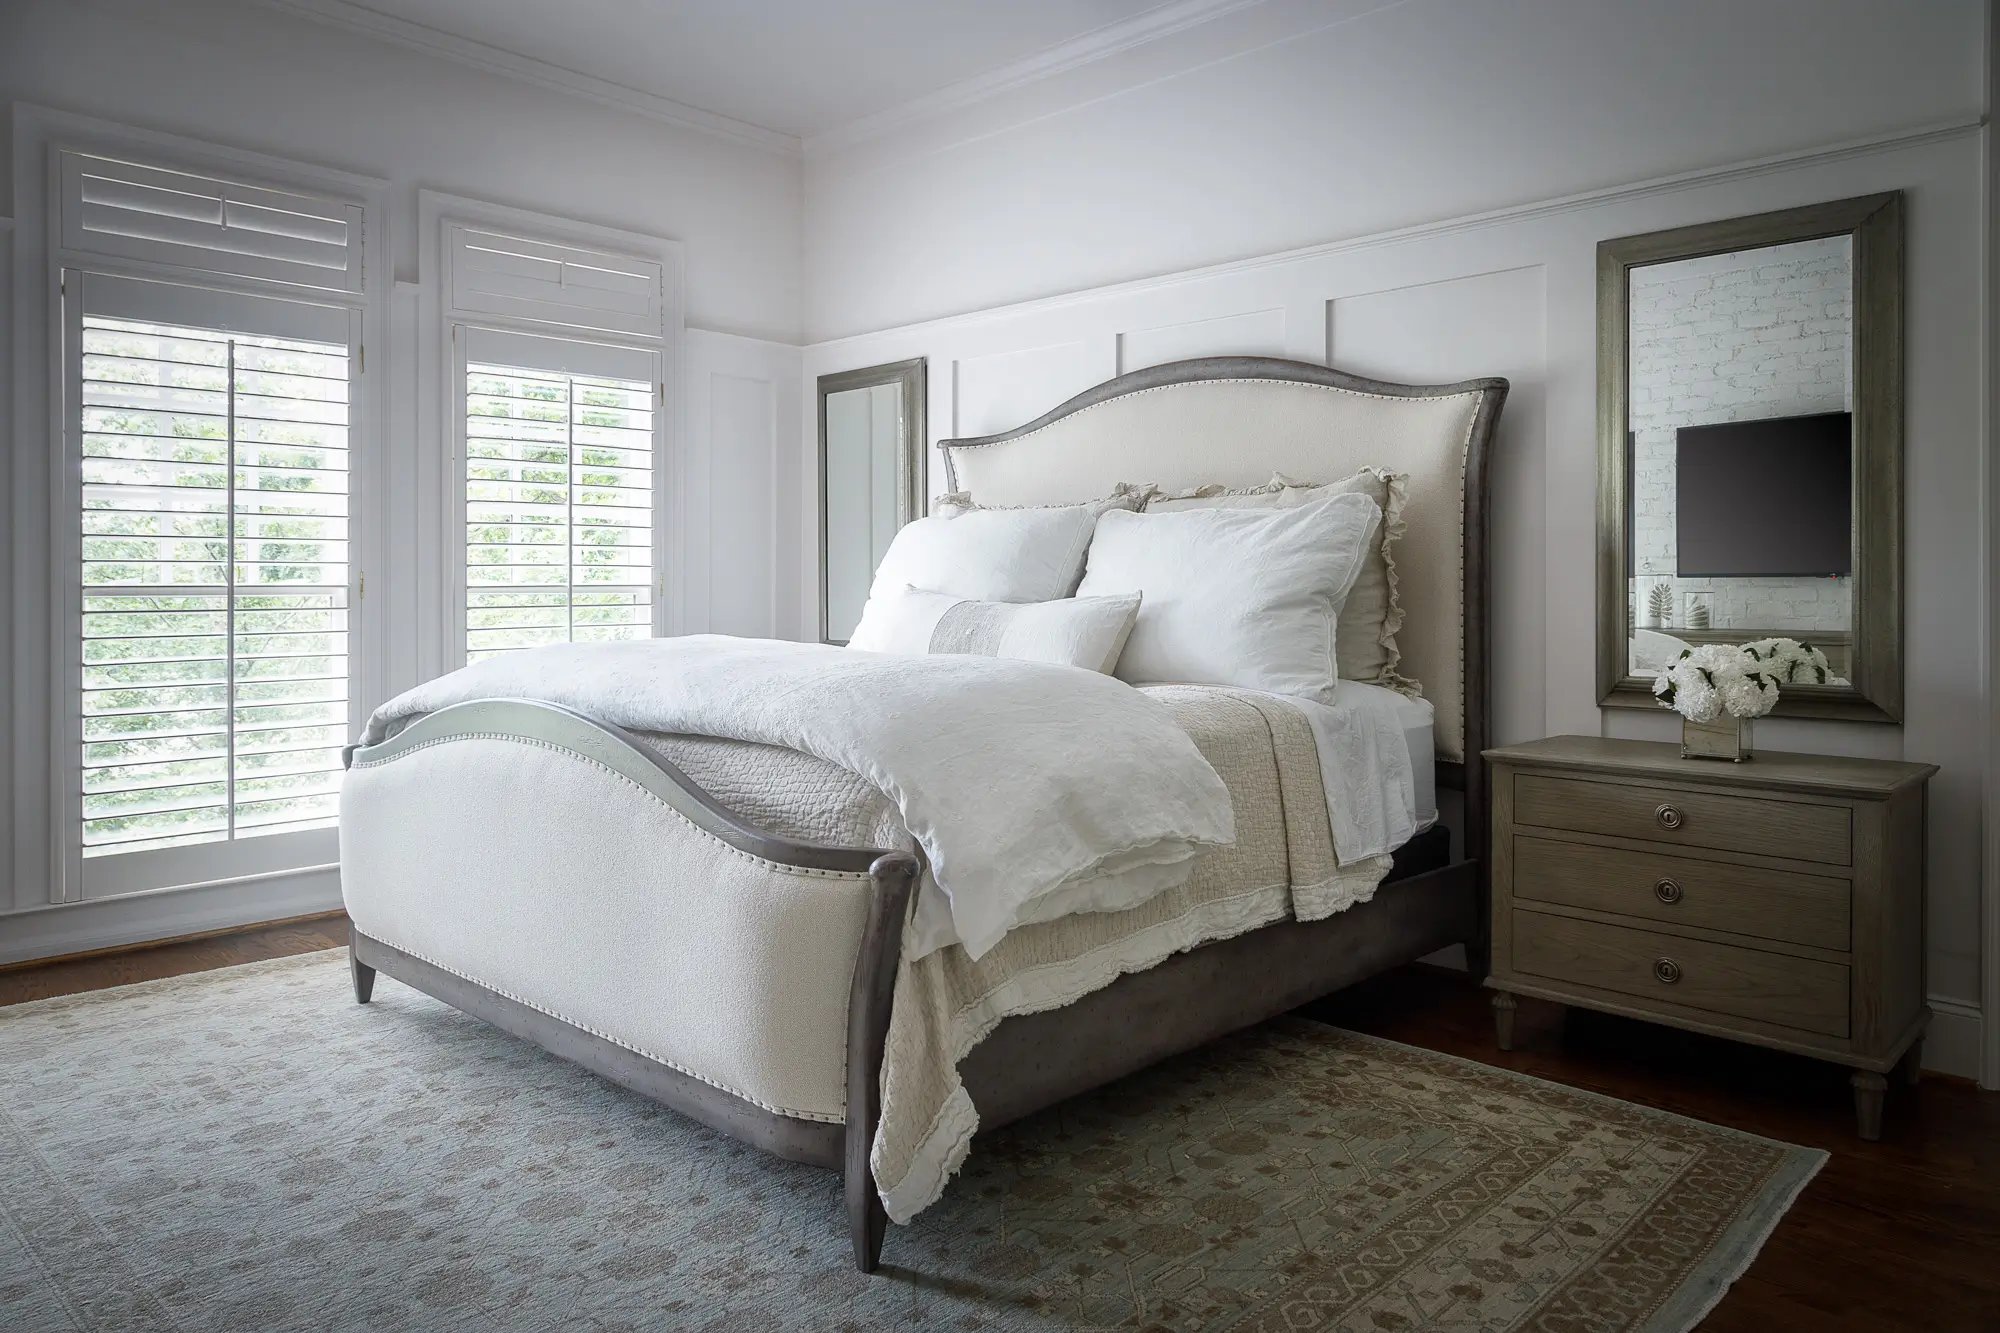 Elegant bedroom with a luxurious bed, plantation shutters, and serene neutral tones.